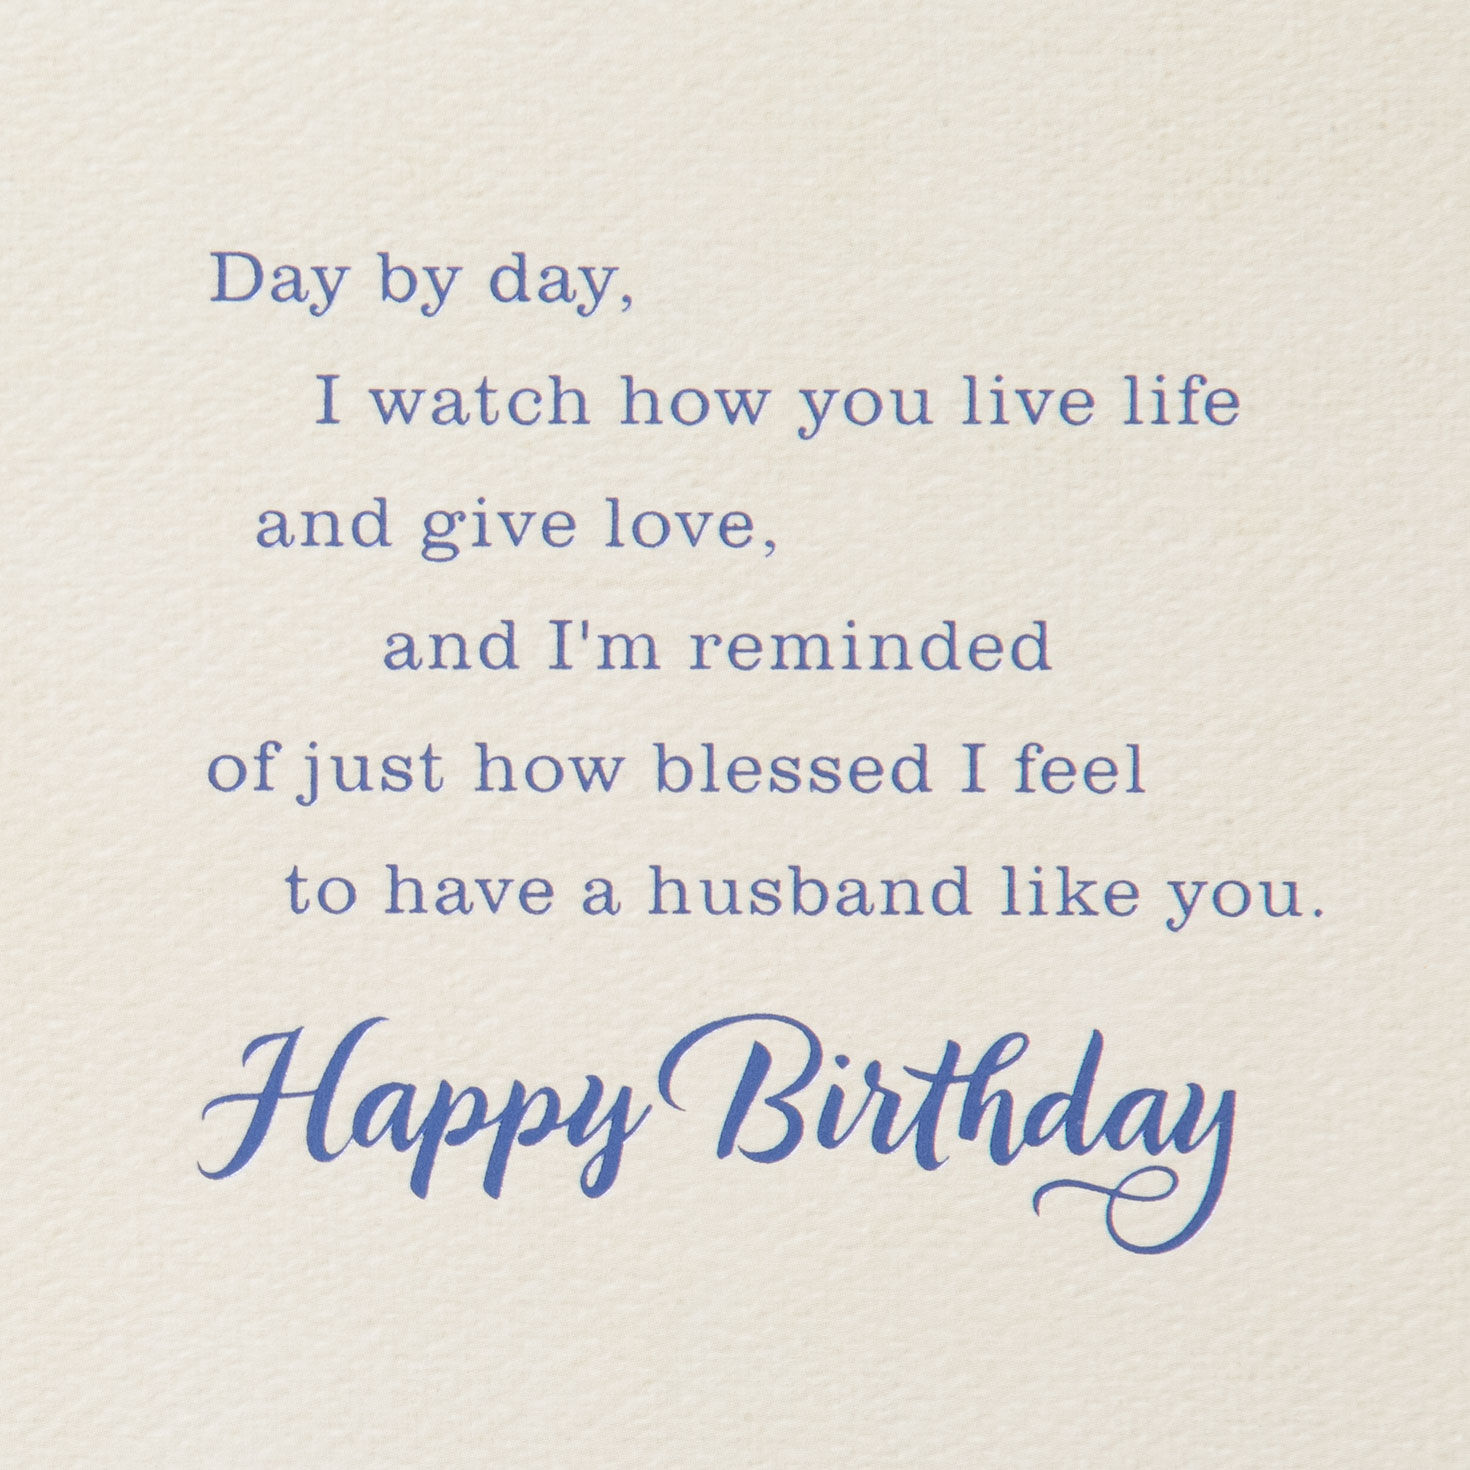 So Much I Love About You Birthday Card for Husband for only USD 5.59 | Hallmark